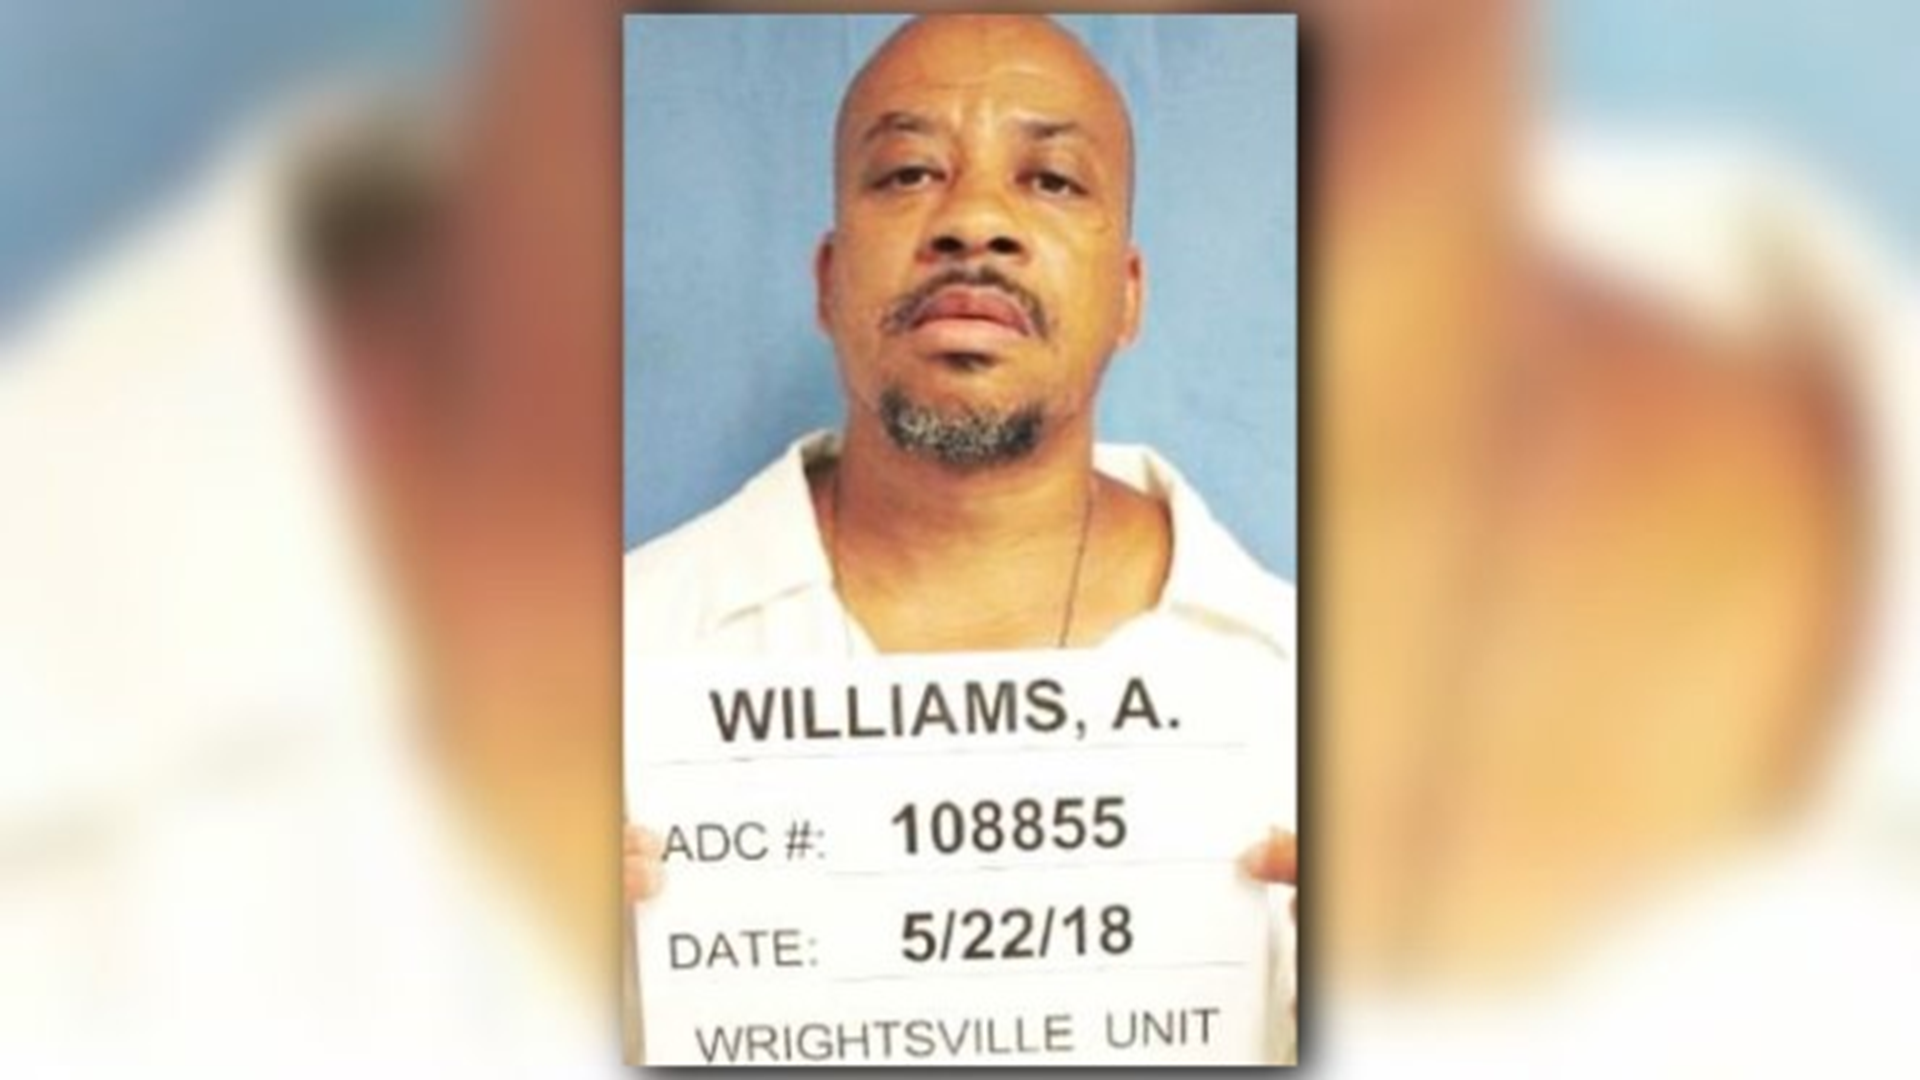 Authorities are investigating after an inmate at Arkansas prison died following an assault by another inmate.